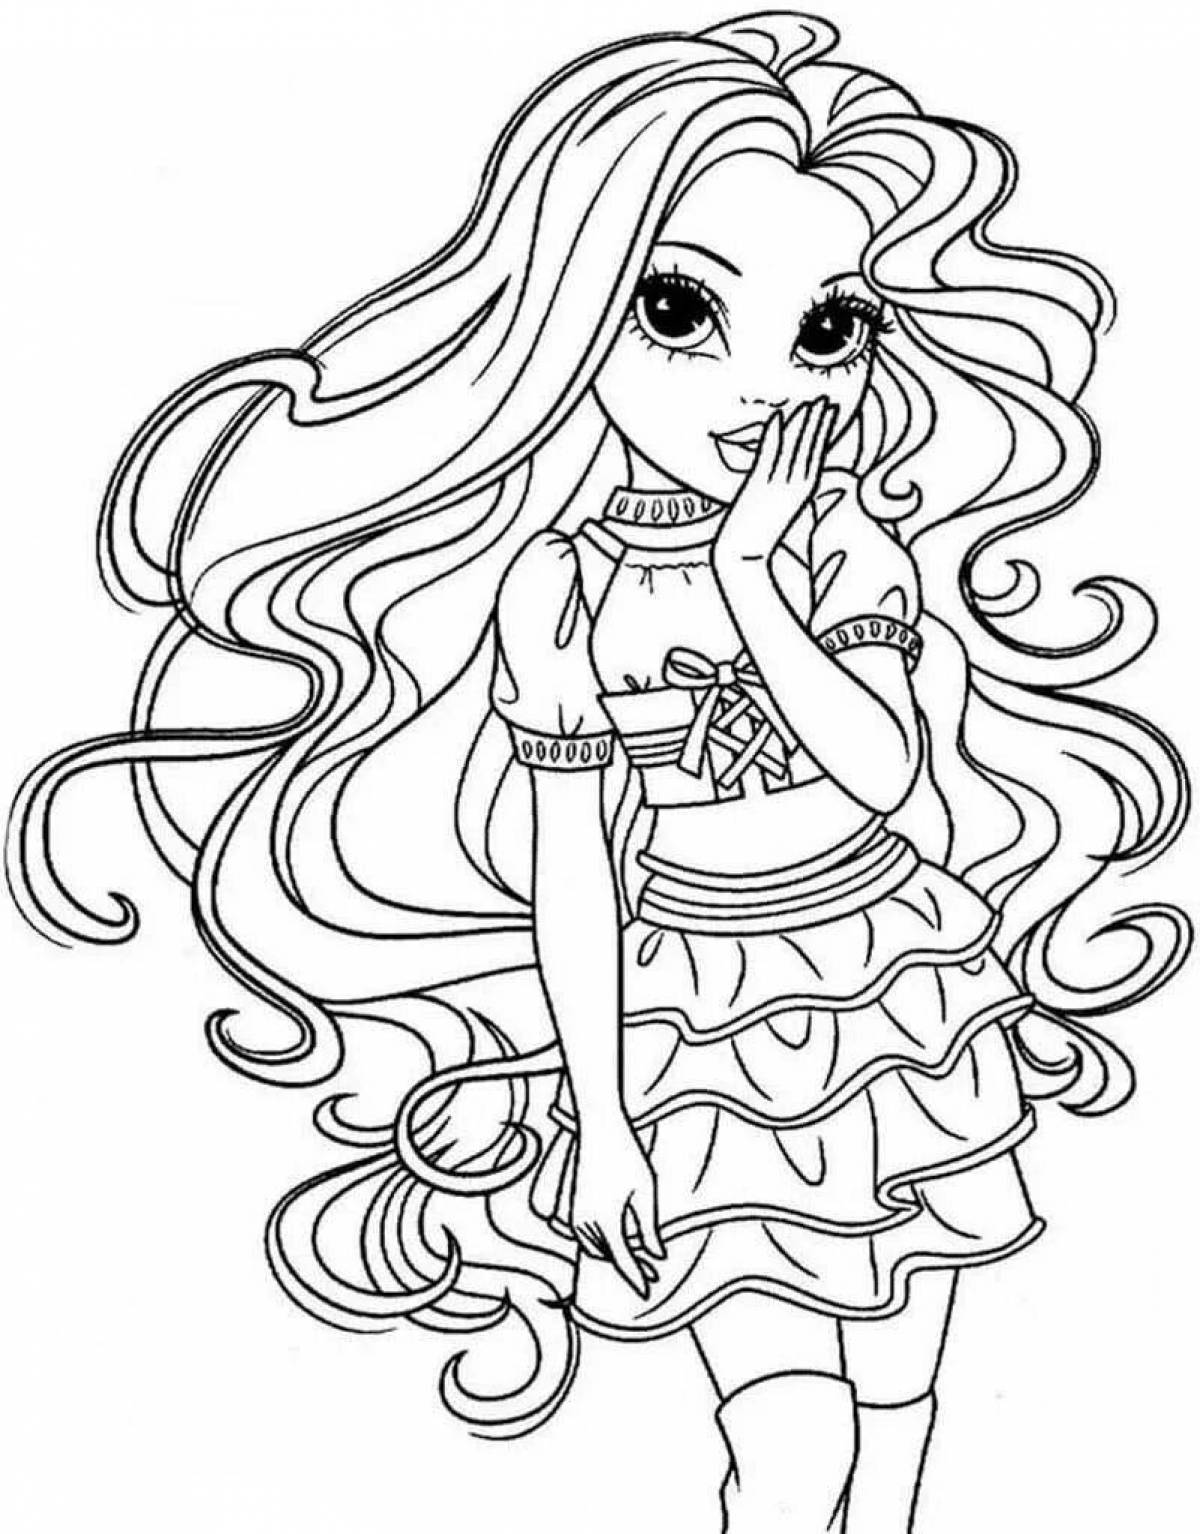 Fairytale coloring book for girls 8-11 years old